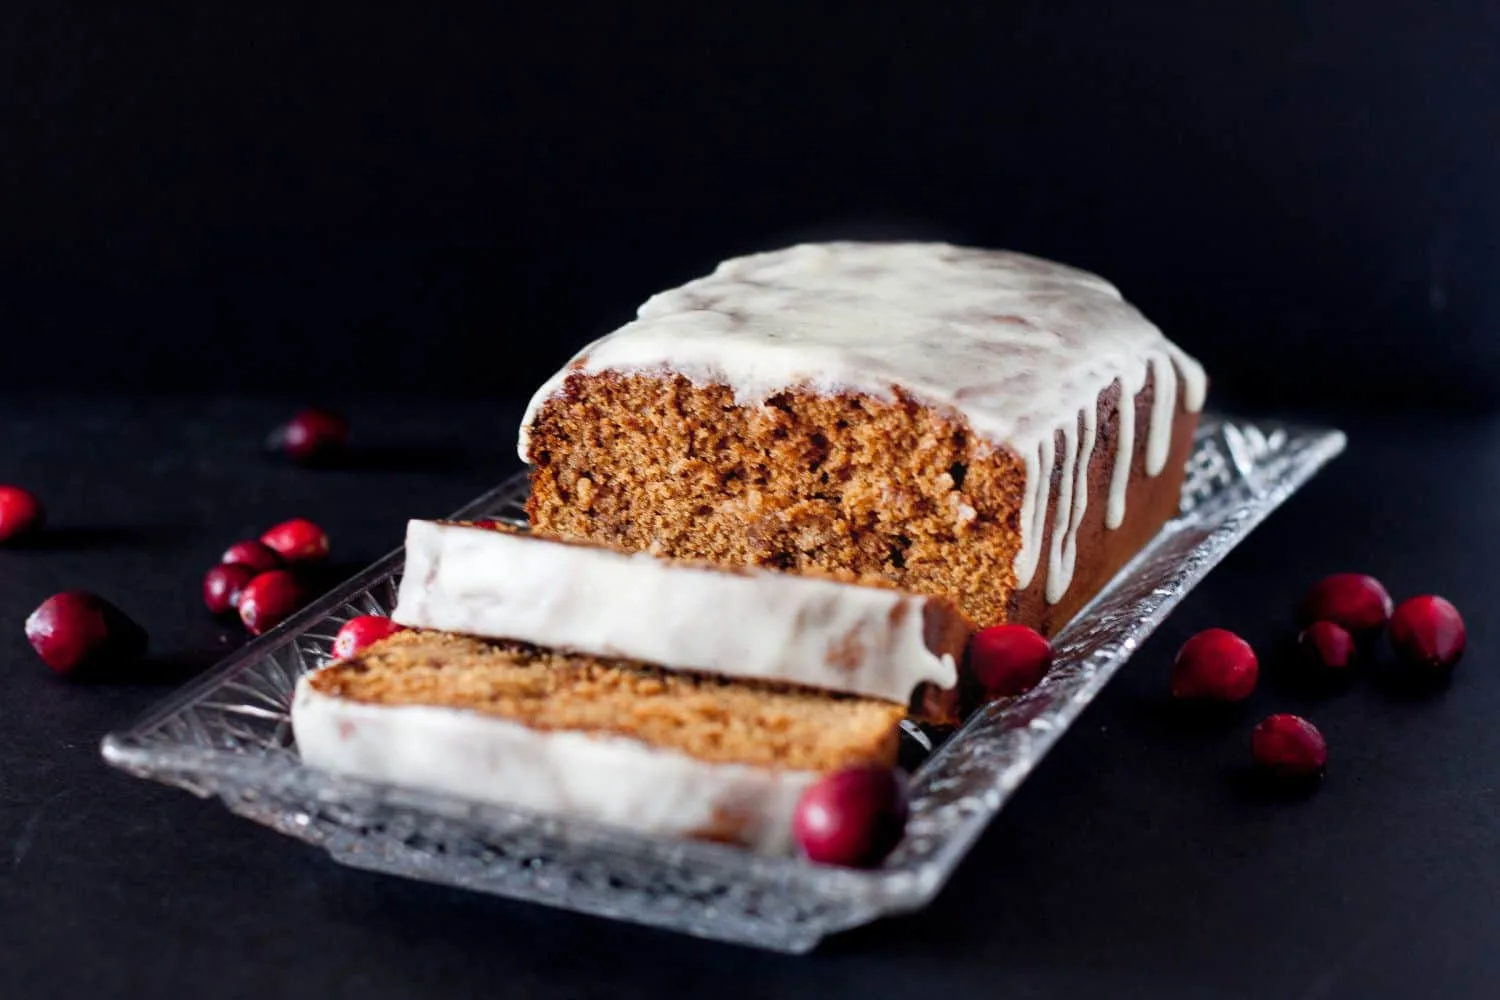 Moist, spiced, gingerbread loaf cake is a mouthwatering way to start the Christmas baking season! This recipe makes the house smell amazing!